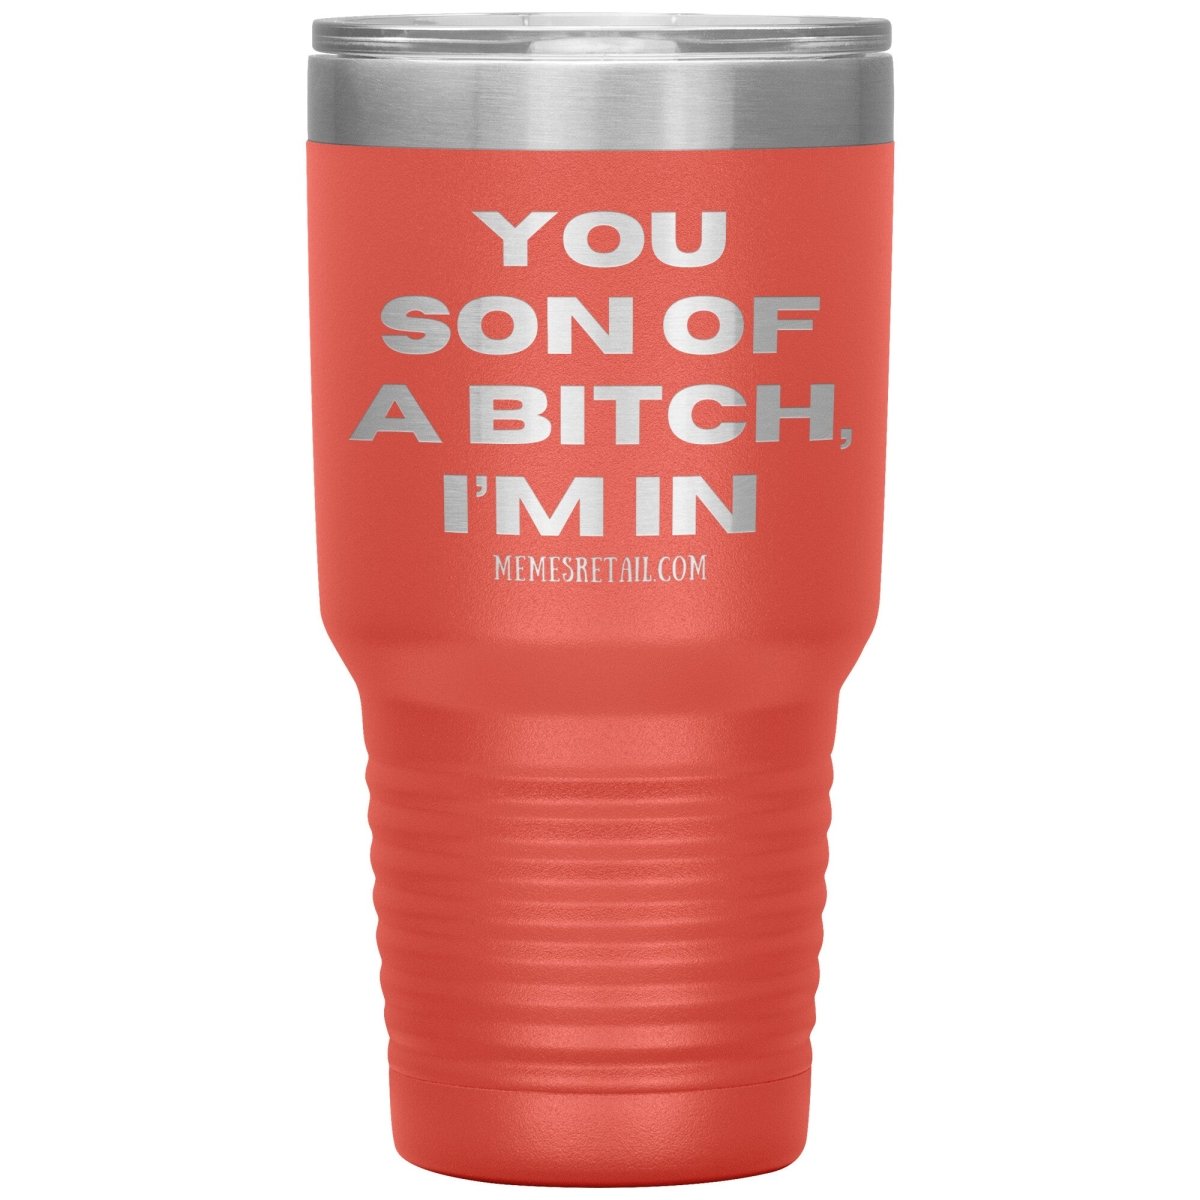 You son of a bitch, I’m in Tumblers, 30oz Insulated Tumbler / Coral - MemesRetail.com